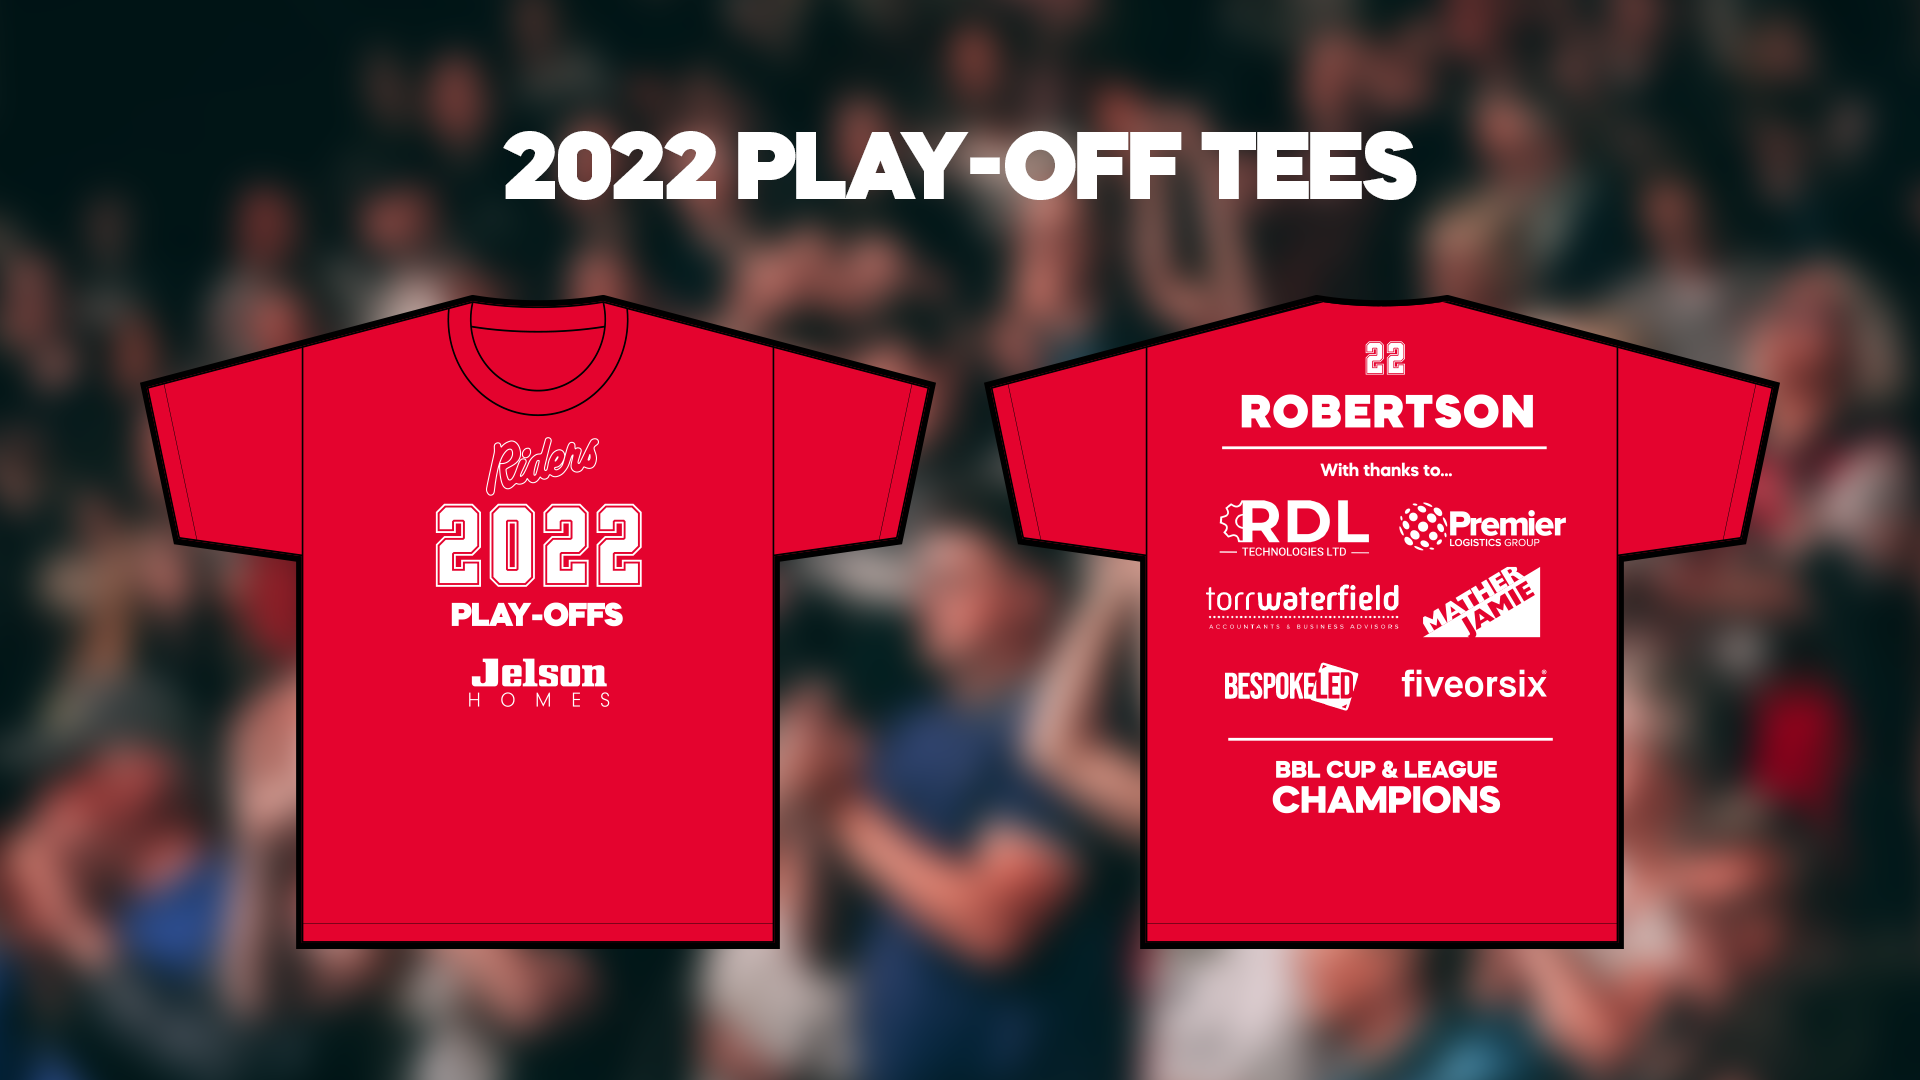 2022 Play-Off tees available Sunday!